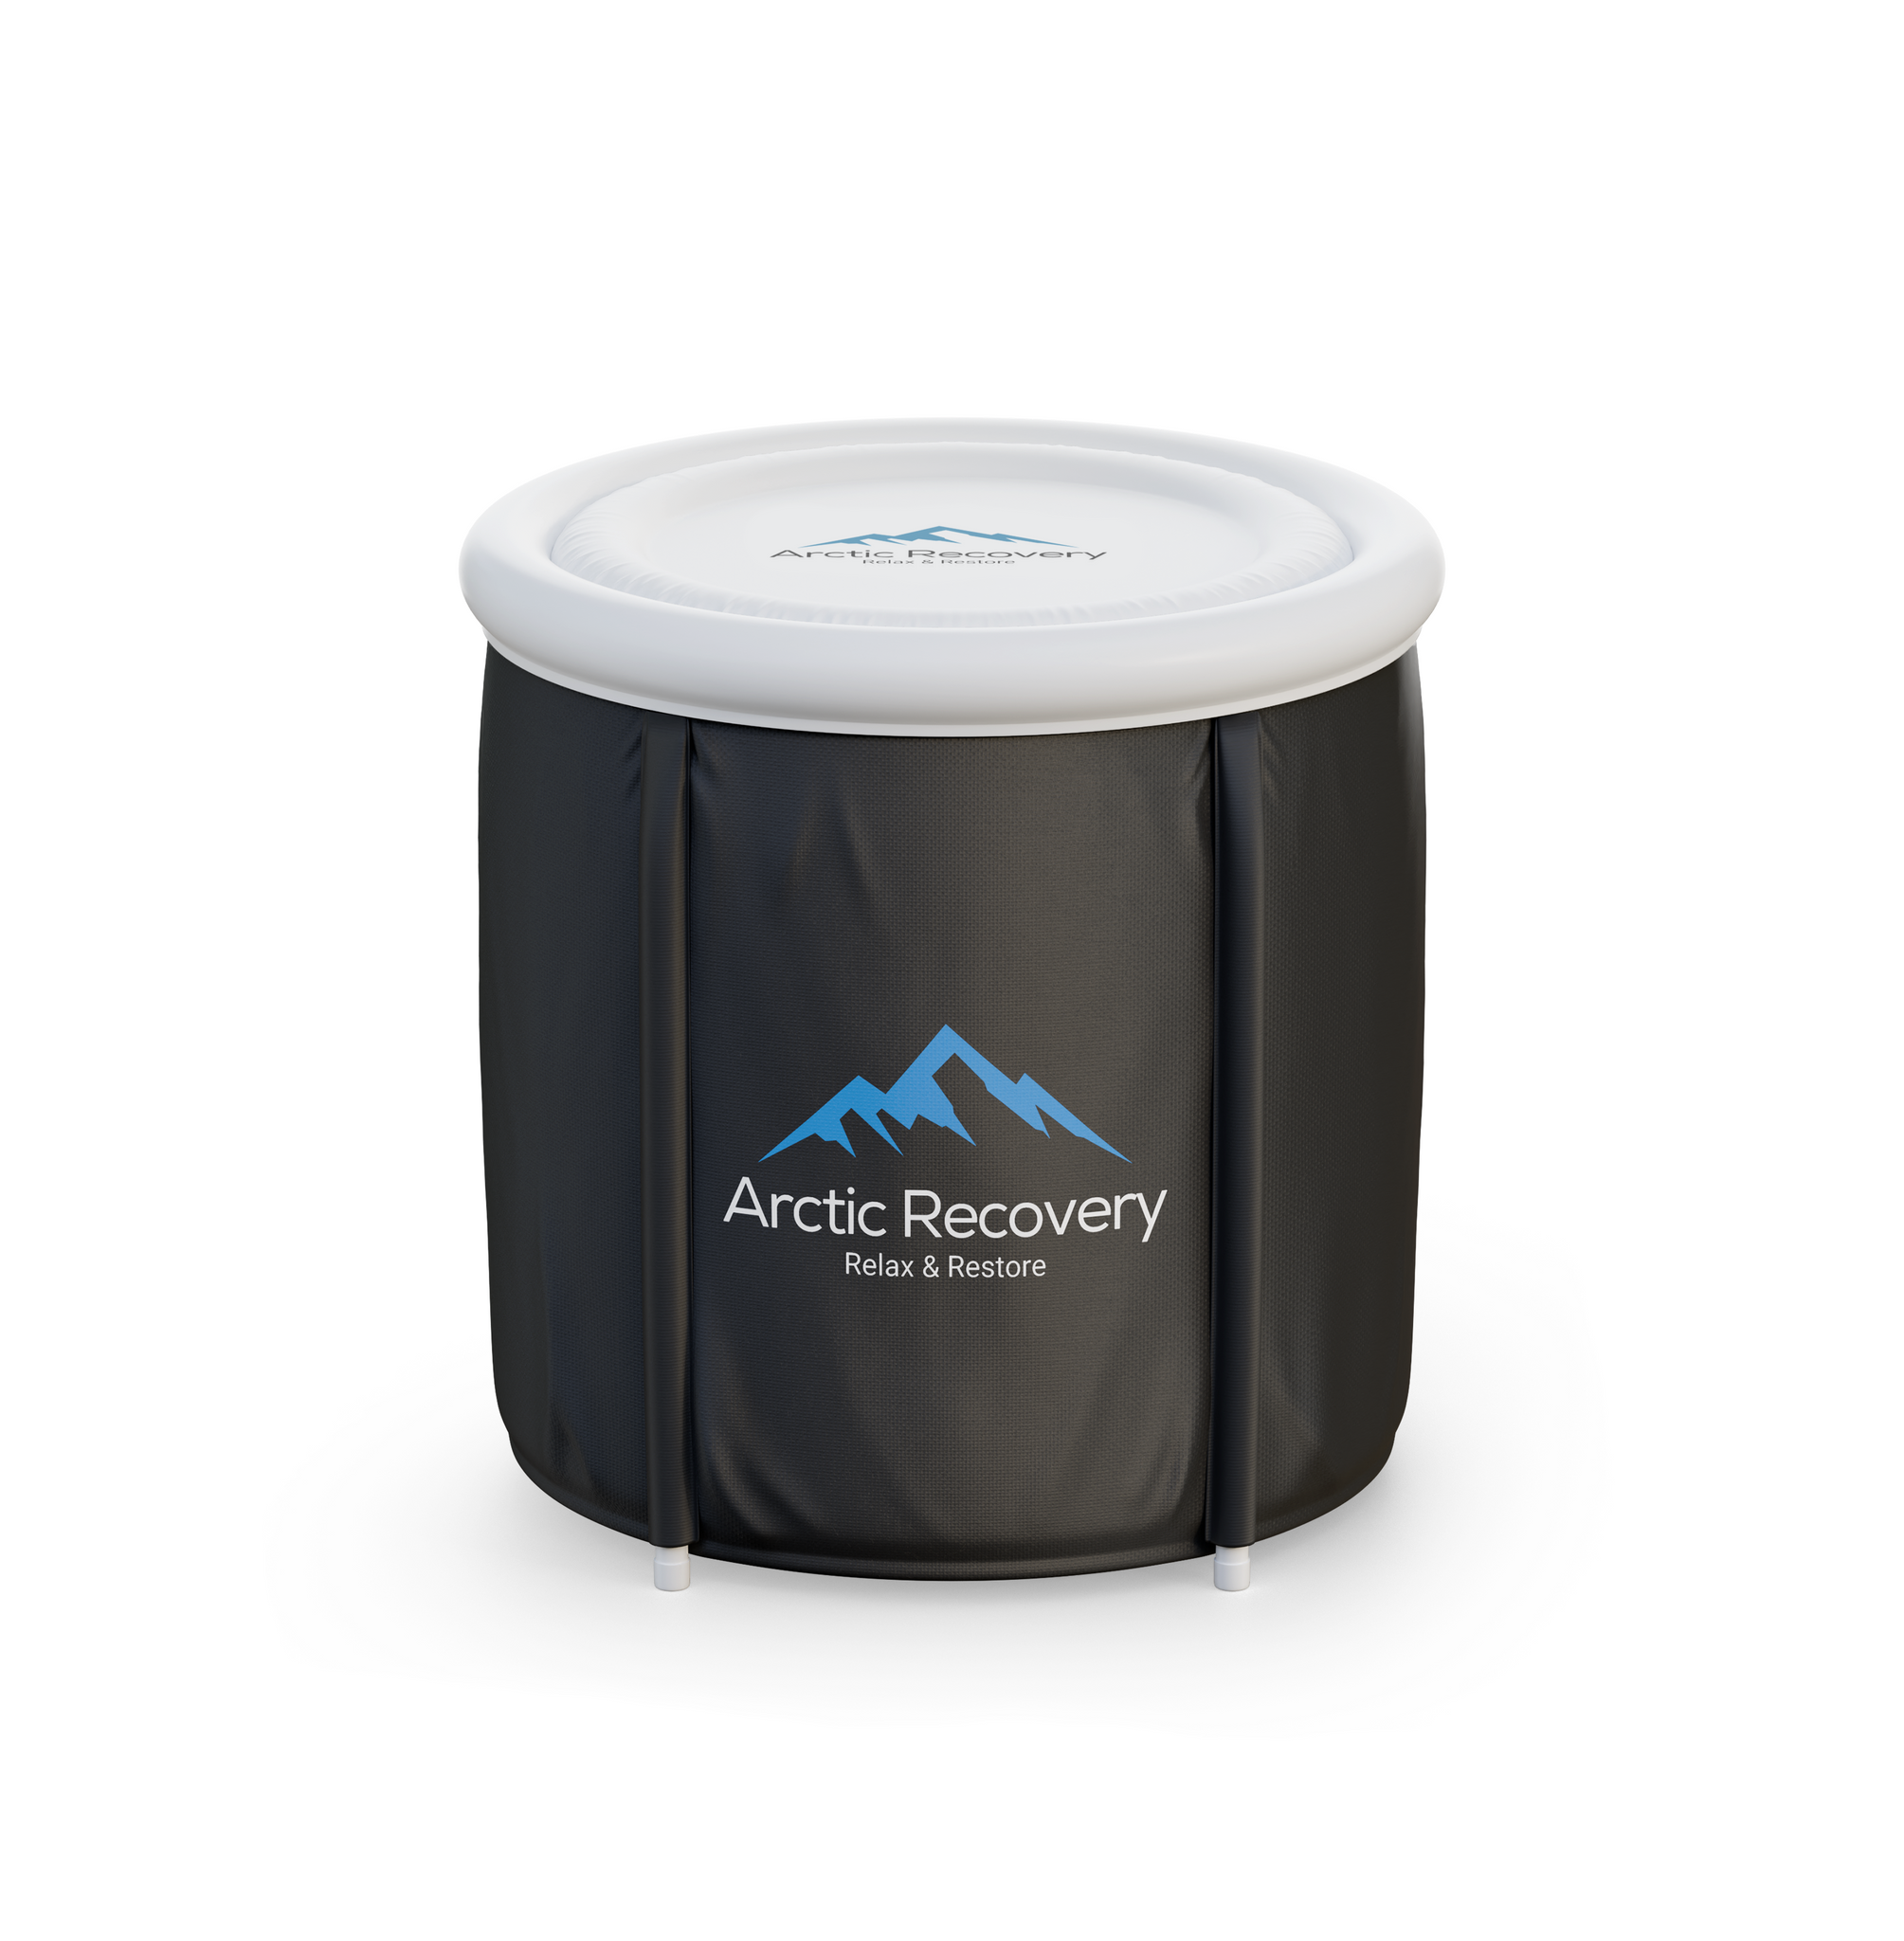 Arctic Recovery Eisbad MAX - 2er-Pack.